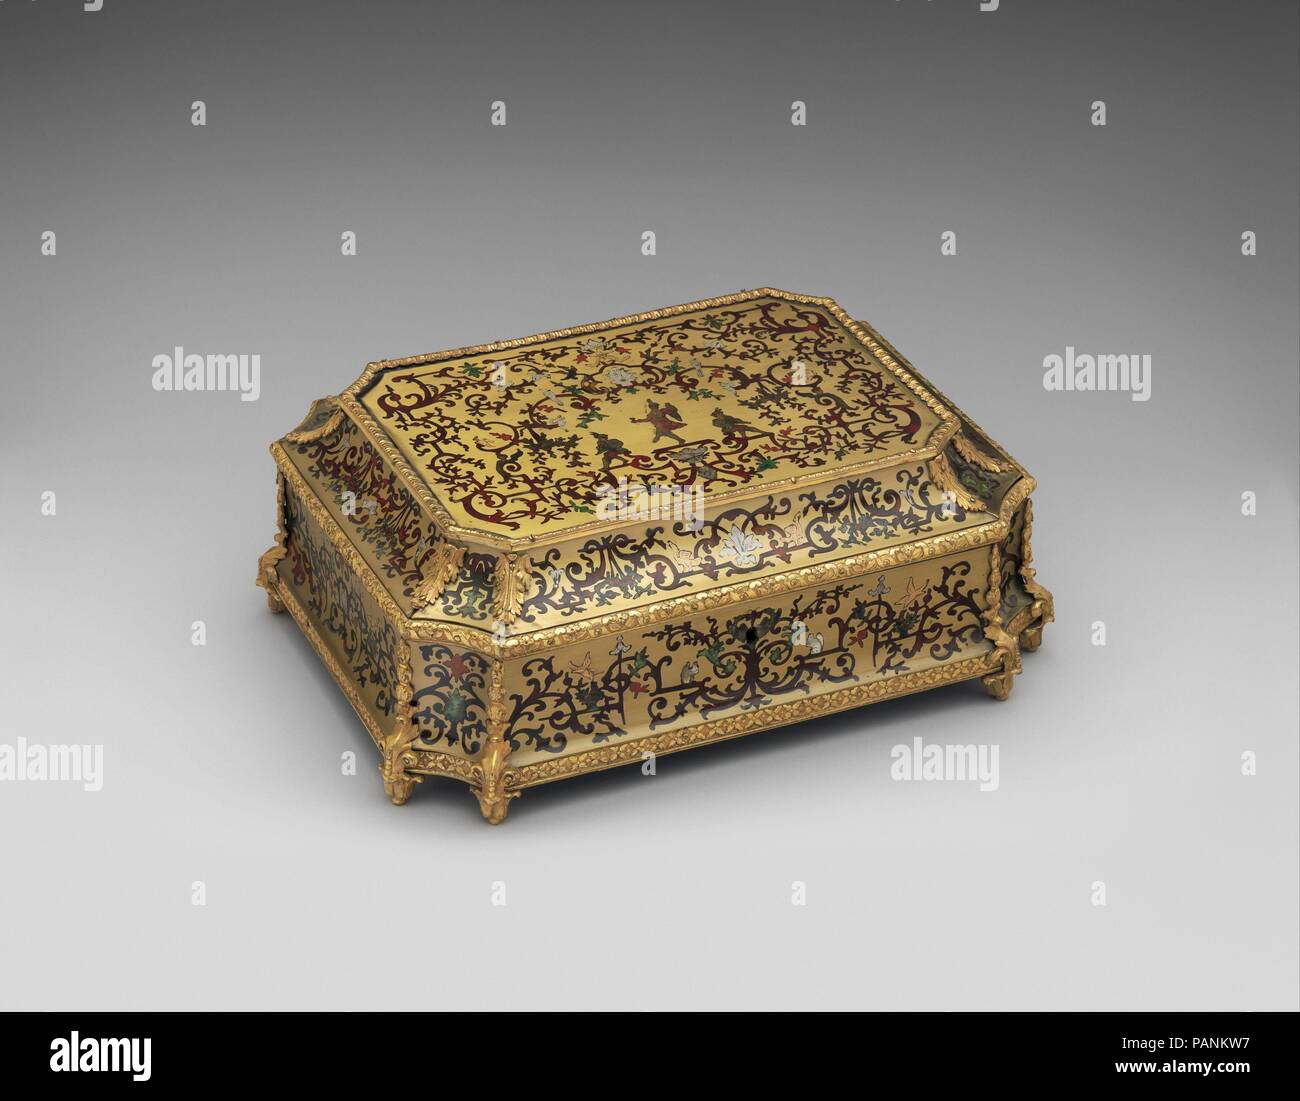 Toilet casket. Culture: French. Dimensions: Overall (confirmed): 5 x 13 1/4 x 10 in. (12.7 x 33.7 x 25.4 cm). Date: 1700-1715.  Known in French as a carré de toilette, this rectangular casket has canted corners and is richly decorated in so-called boulle marquetry of brass inlaid with tortoiseshell, mother-of-pearl, and tinted horn (contre partie). Containing ribbons, feathers, or other adornments, boxes like this played a role in the elaborate dressing ritual of the past and would have been placed on the dressing table. Similar caskets are depicted in Jean-Marc Nattier's portrait Madame Marso Stock Photo